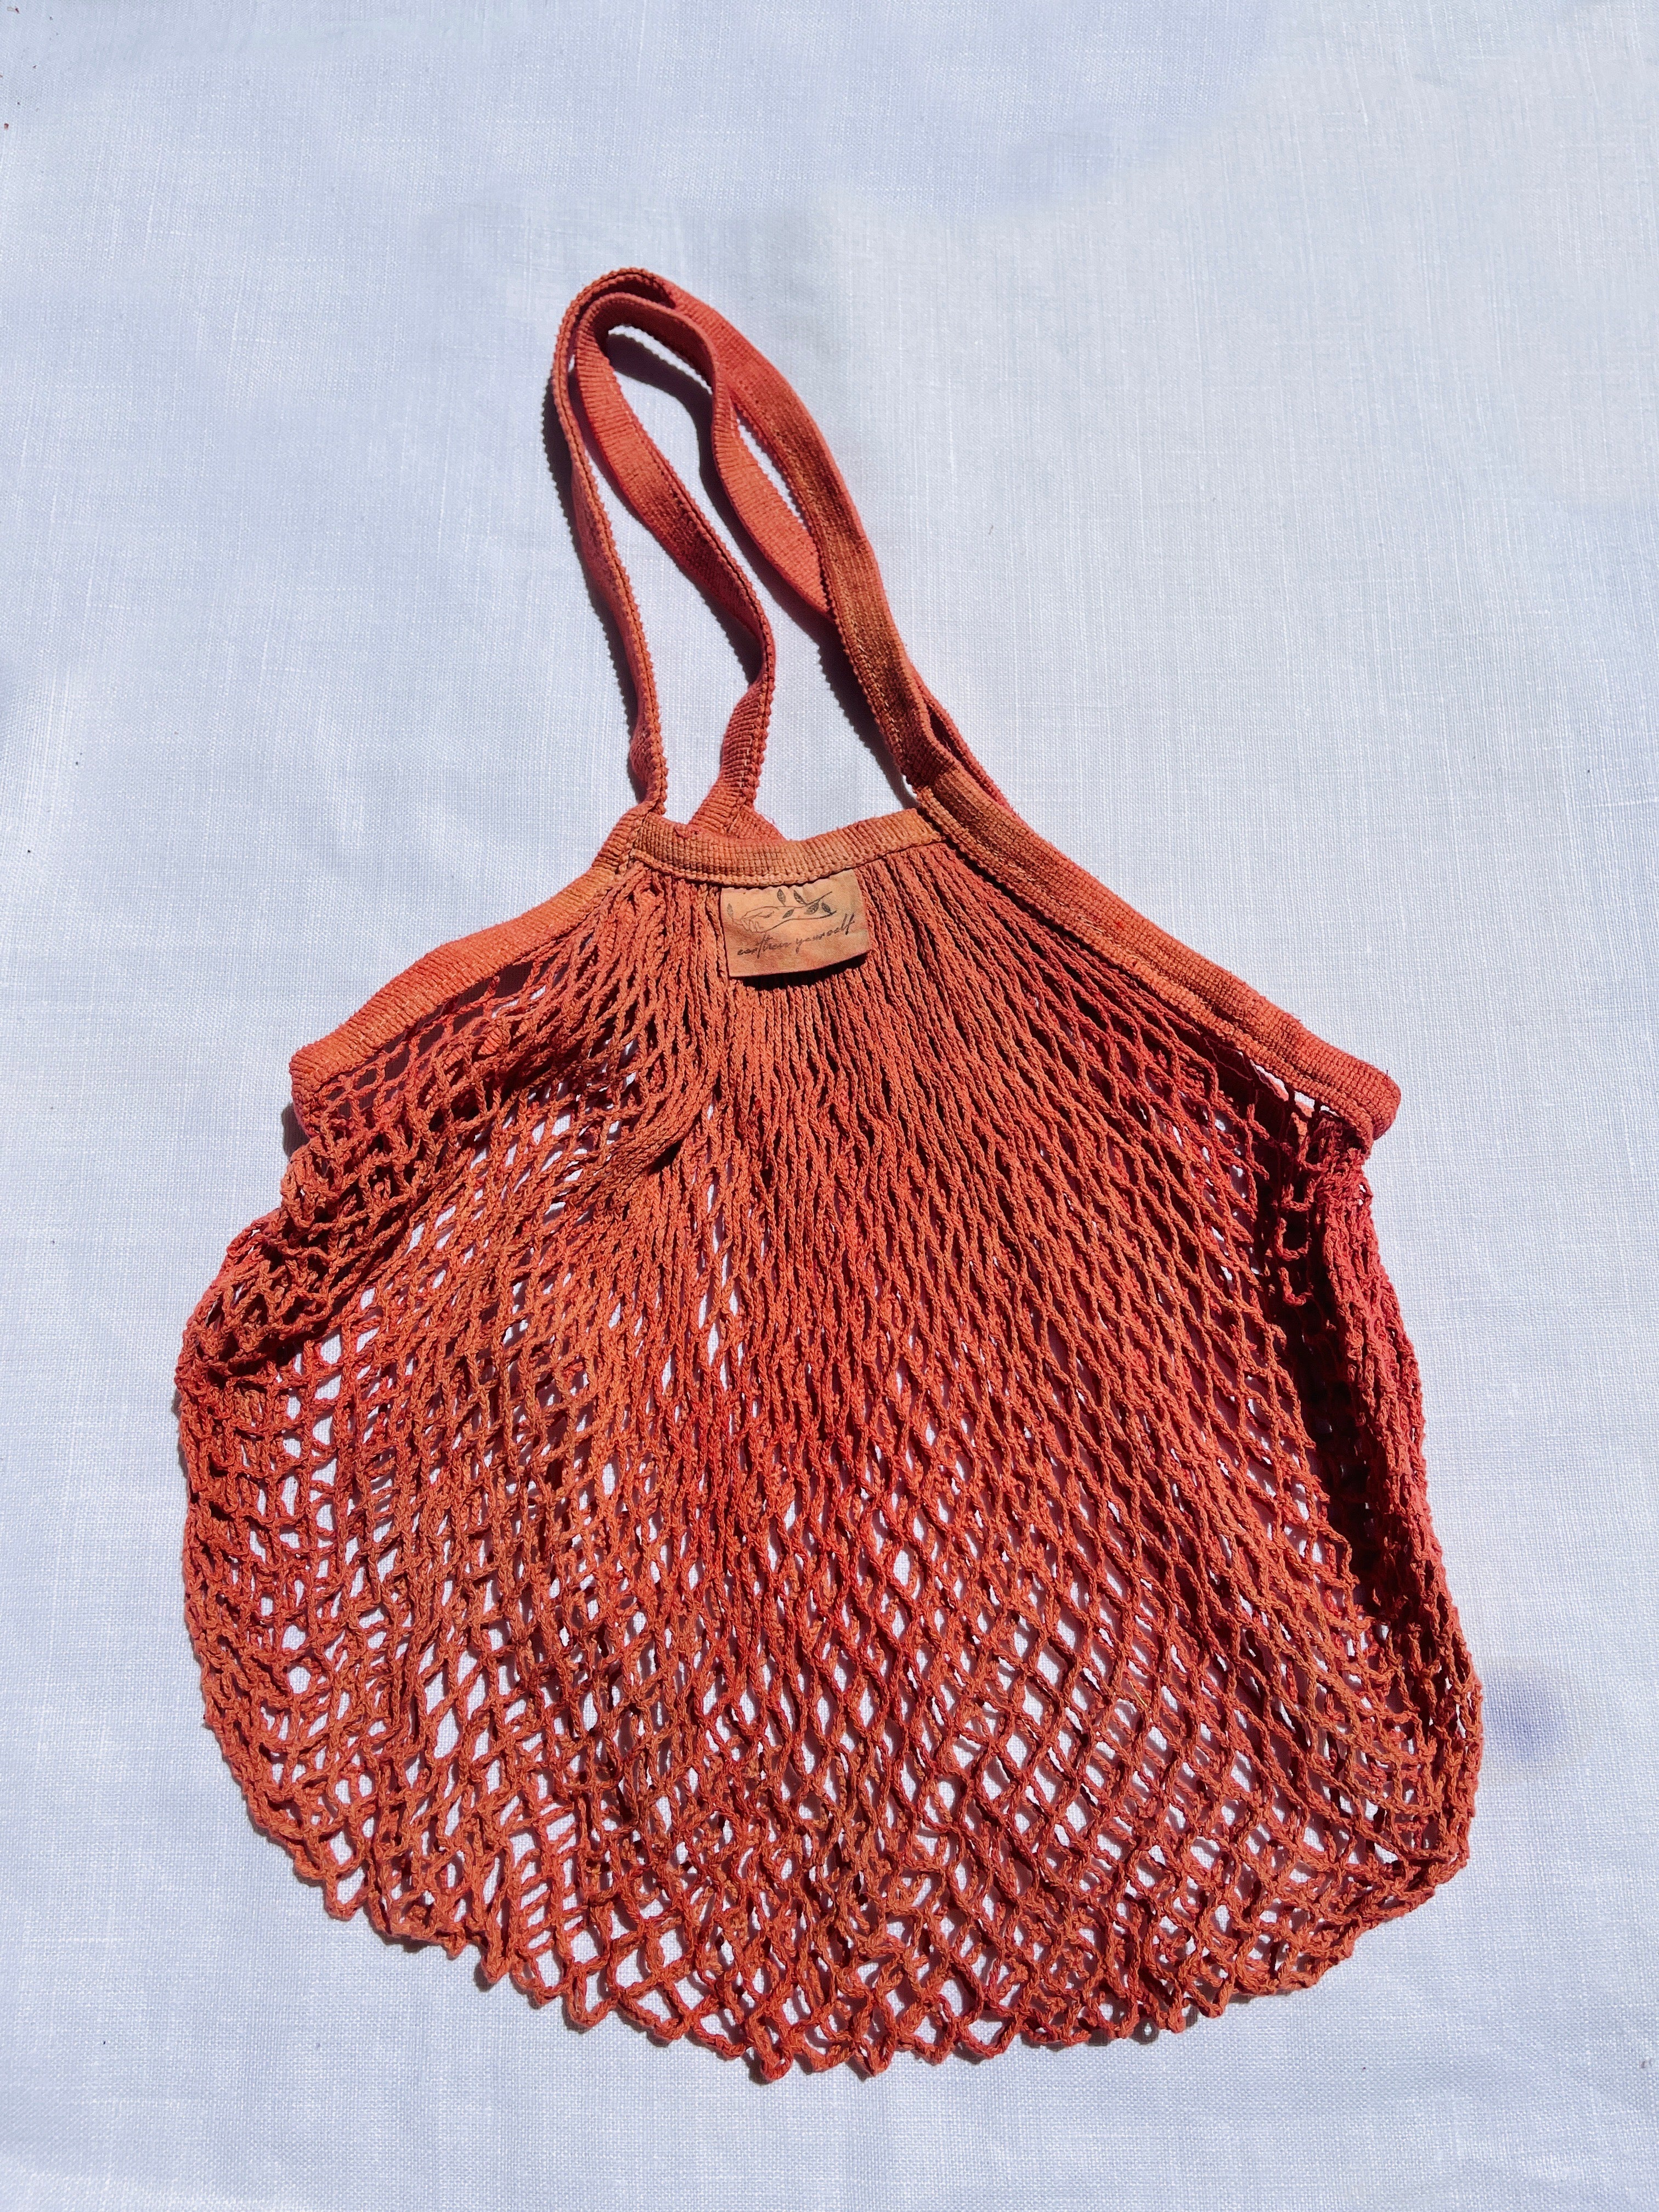 plant dyed cotton bags - earthen yourself